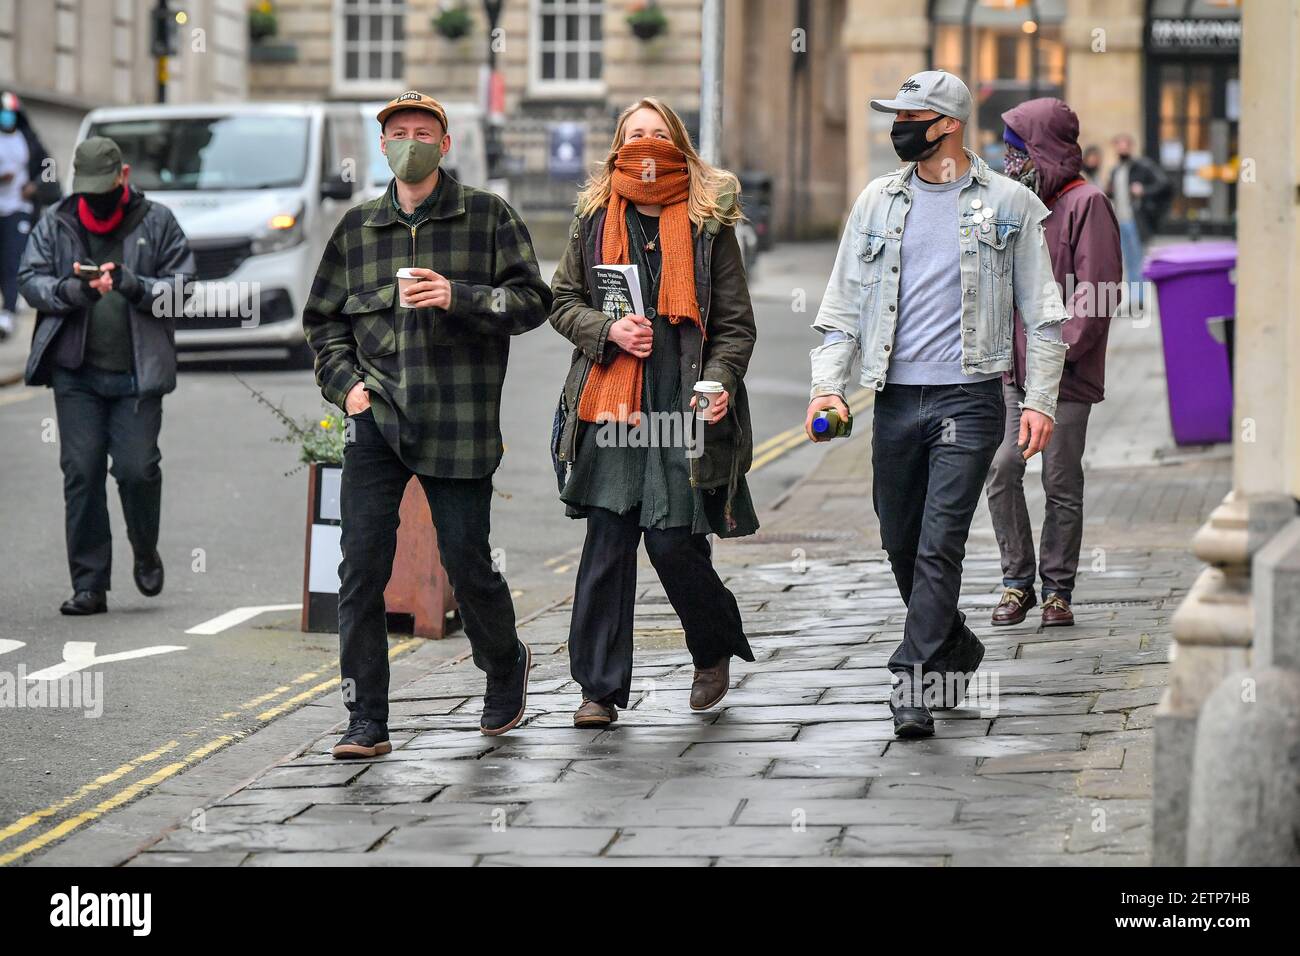 (left to right) Milo Ponsford, Rhian Graham and Jake Skuse arrive at Bristol Crown Court where they and one other are appearing charged with criminal damage over the toppling of the Edward Colston statue in Bristol during the Black Lives Matter protests in June last year. Picture date: Tuesday March 2, 2021. Stock Photo